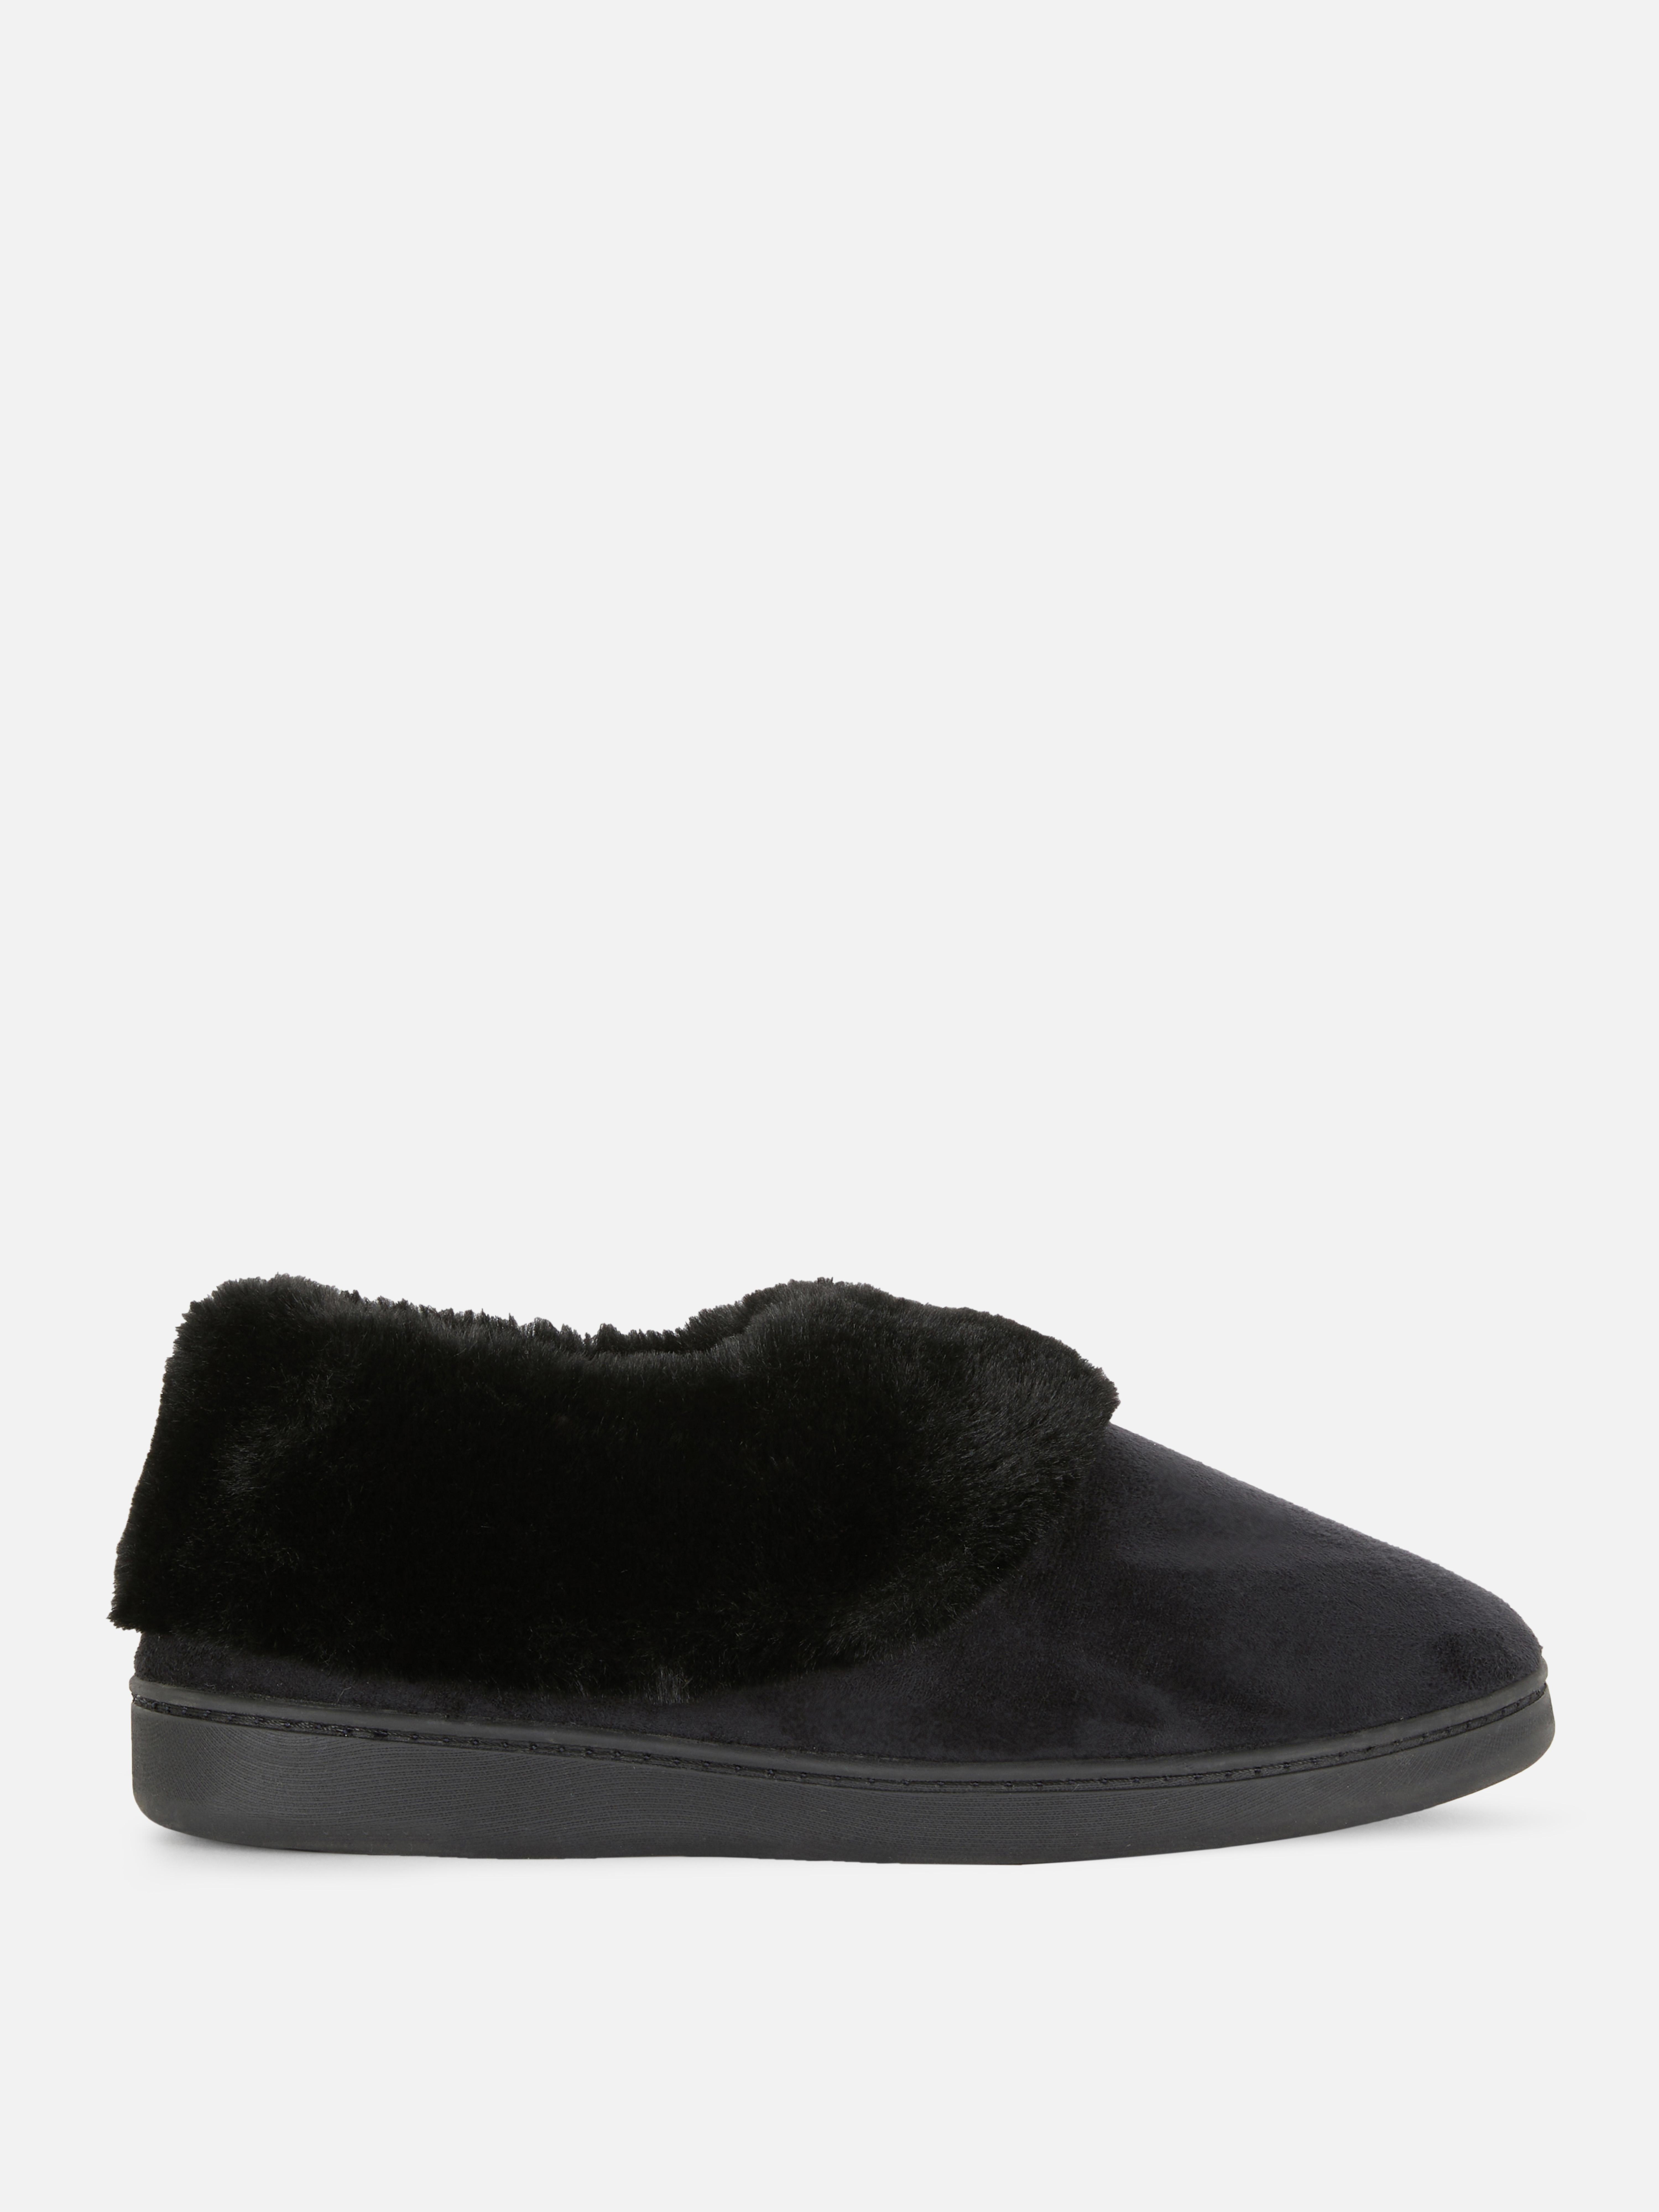 Faux suede moccasin slippers